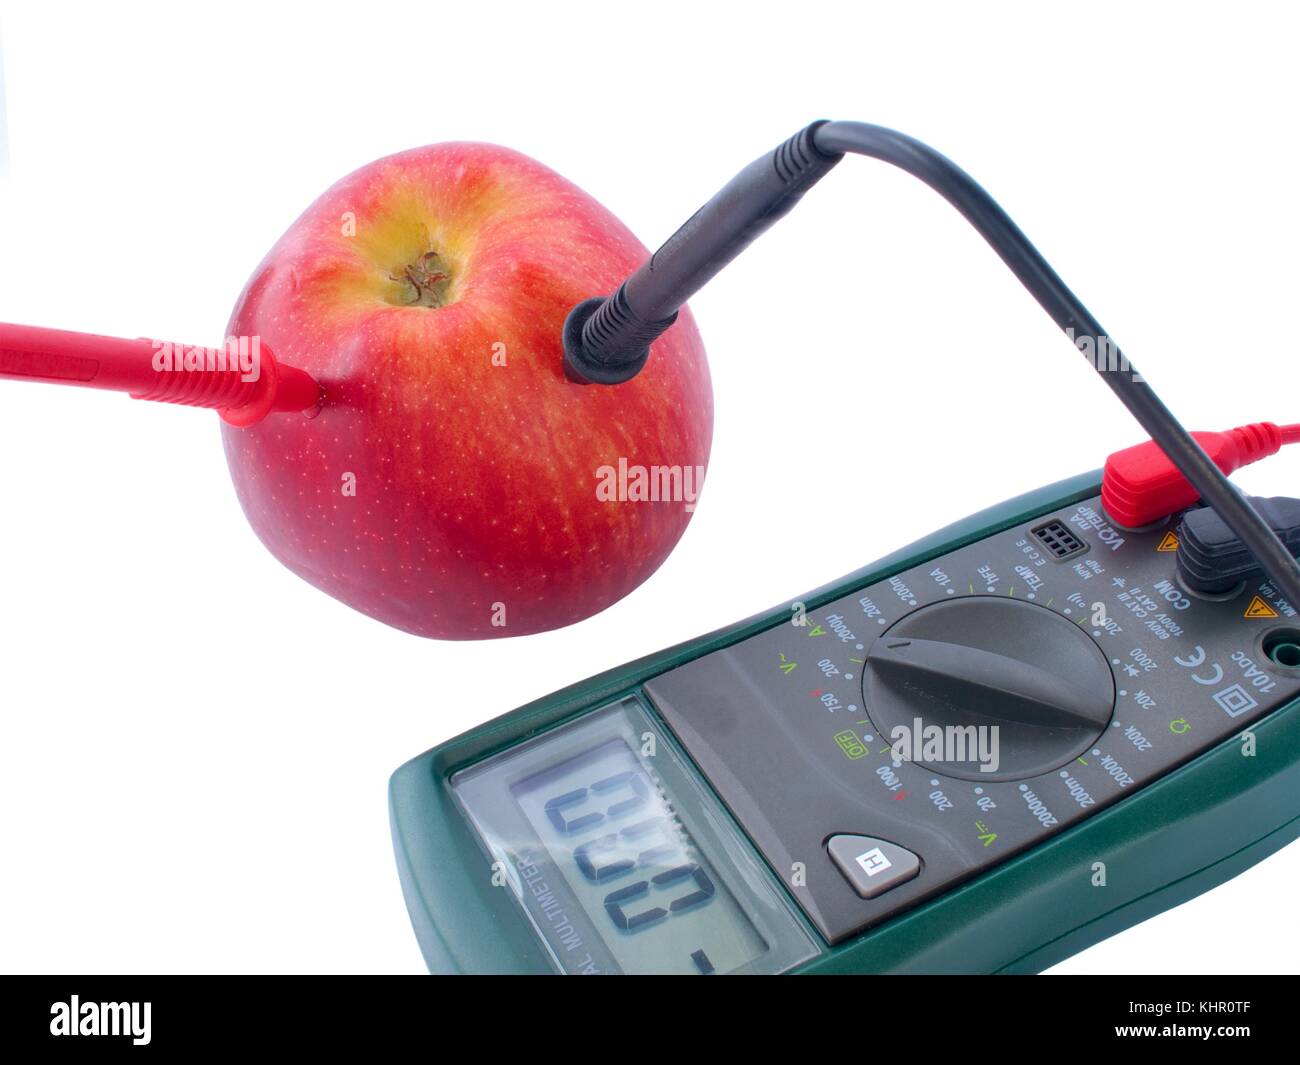 Digital multimeter electrical measuring equipment with apple. Stock Photo